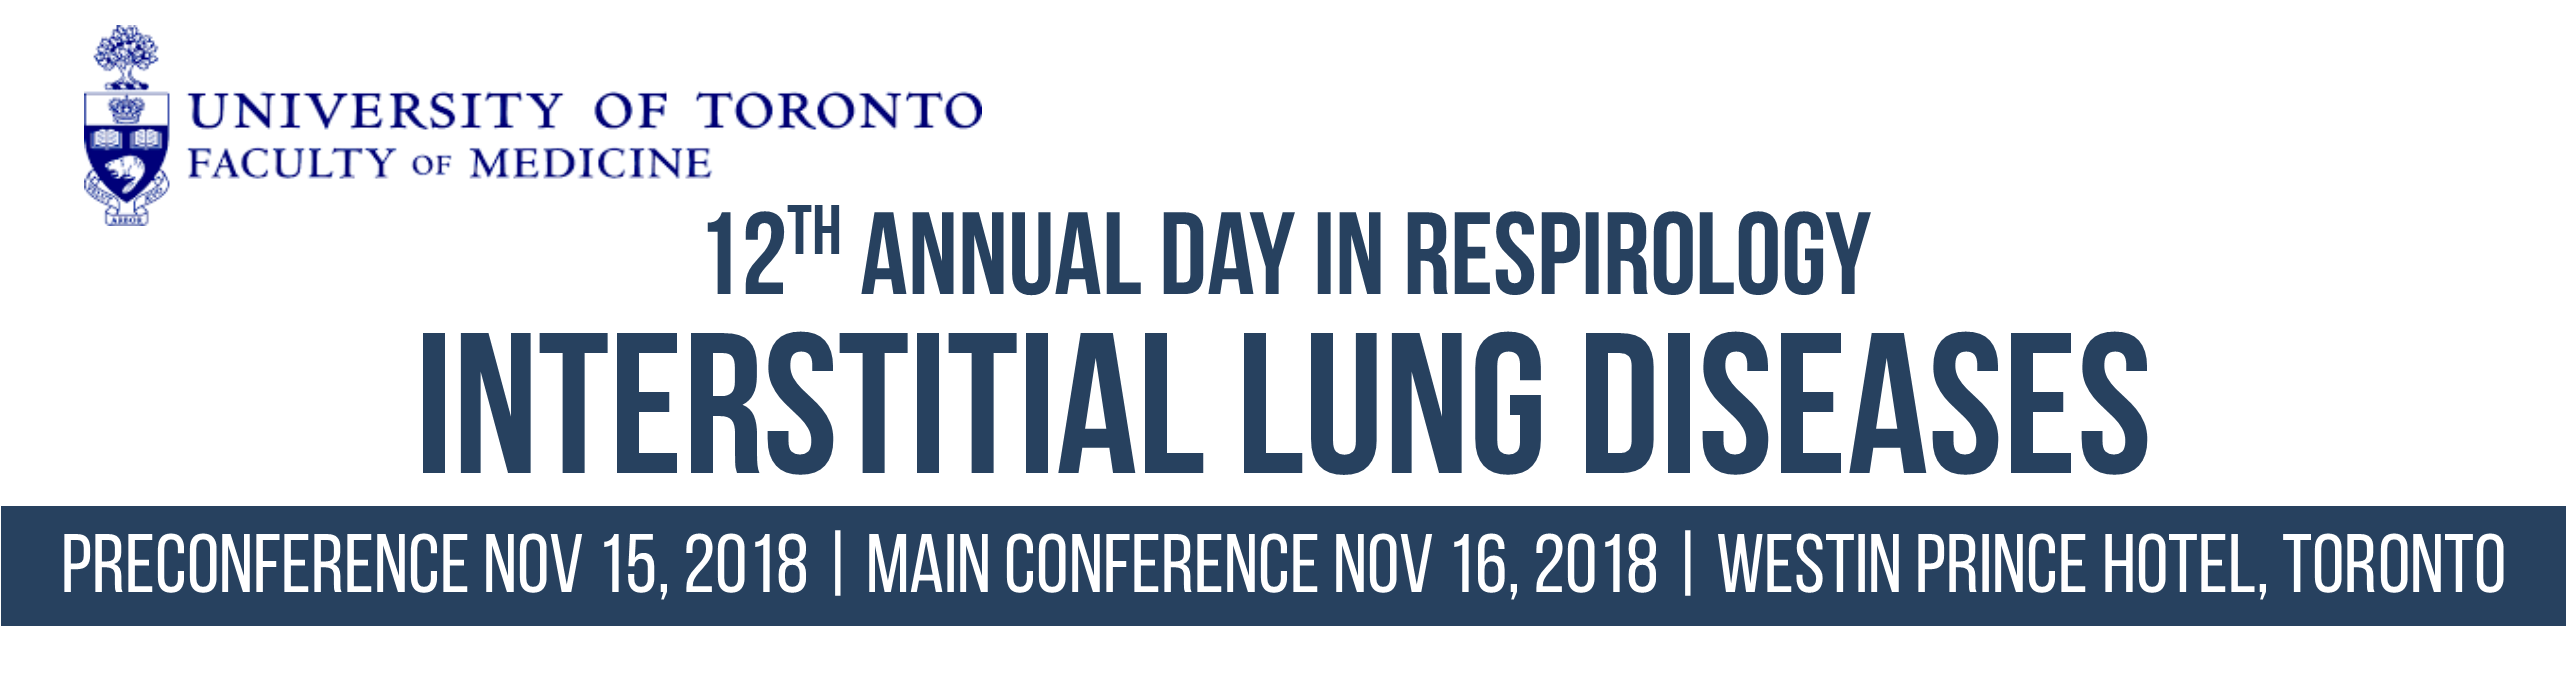 12th Annual Day in Respirology: Interstitial Lung Diseases